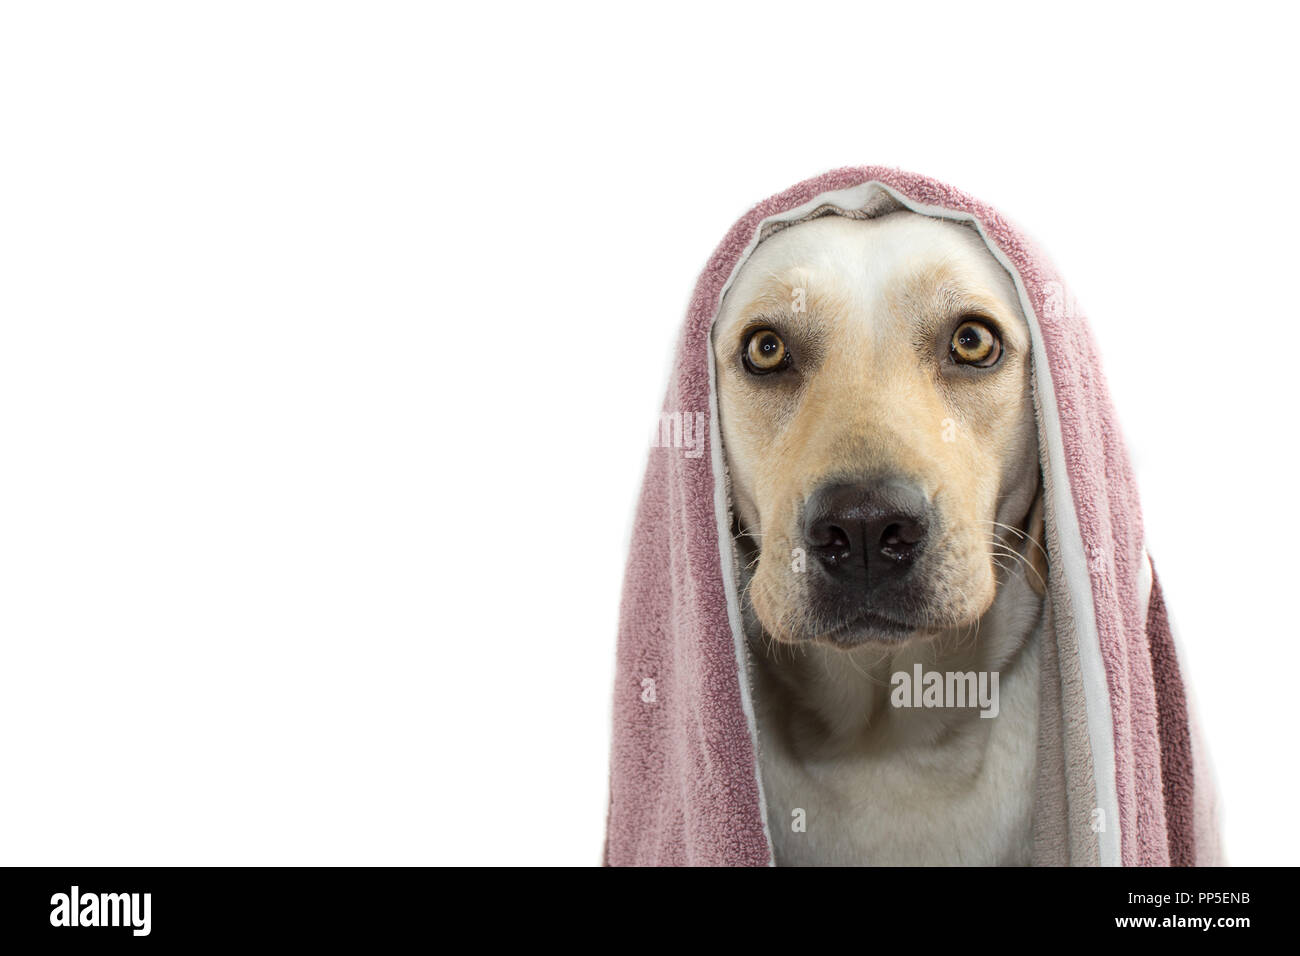 DOG WAITING FOR A BATH, COVERING ITS HEAD WITH A TOWEL. ISOLATED SHOT AGAINST WHITE BACKGROUND. Stock Photo